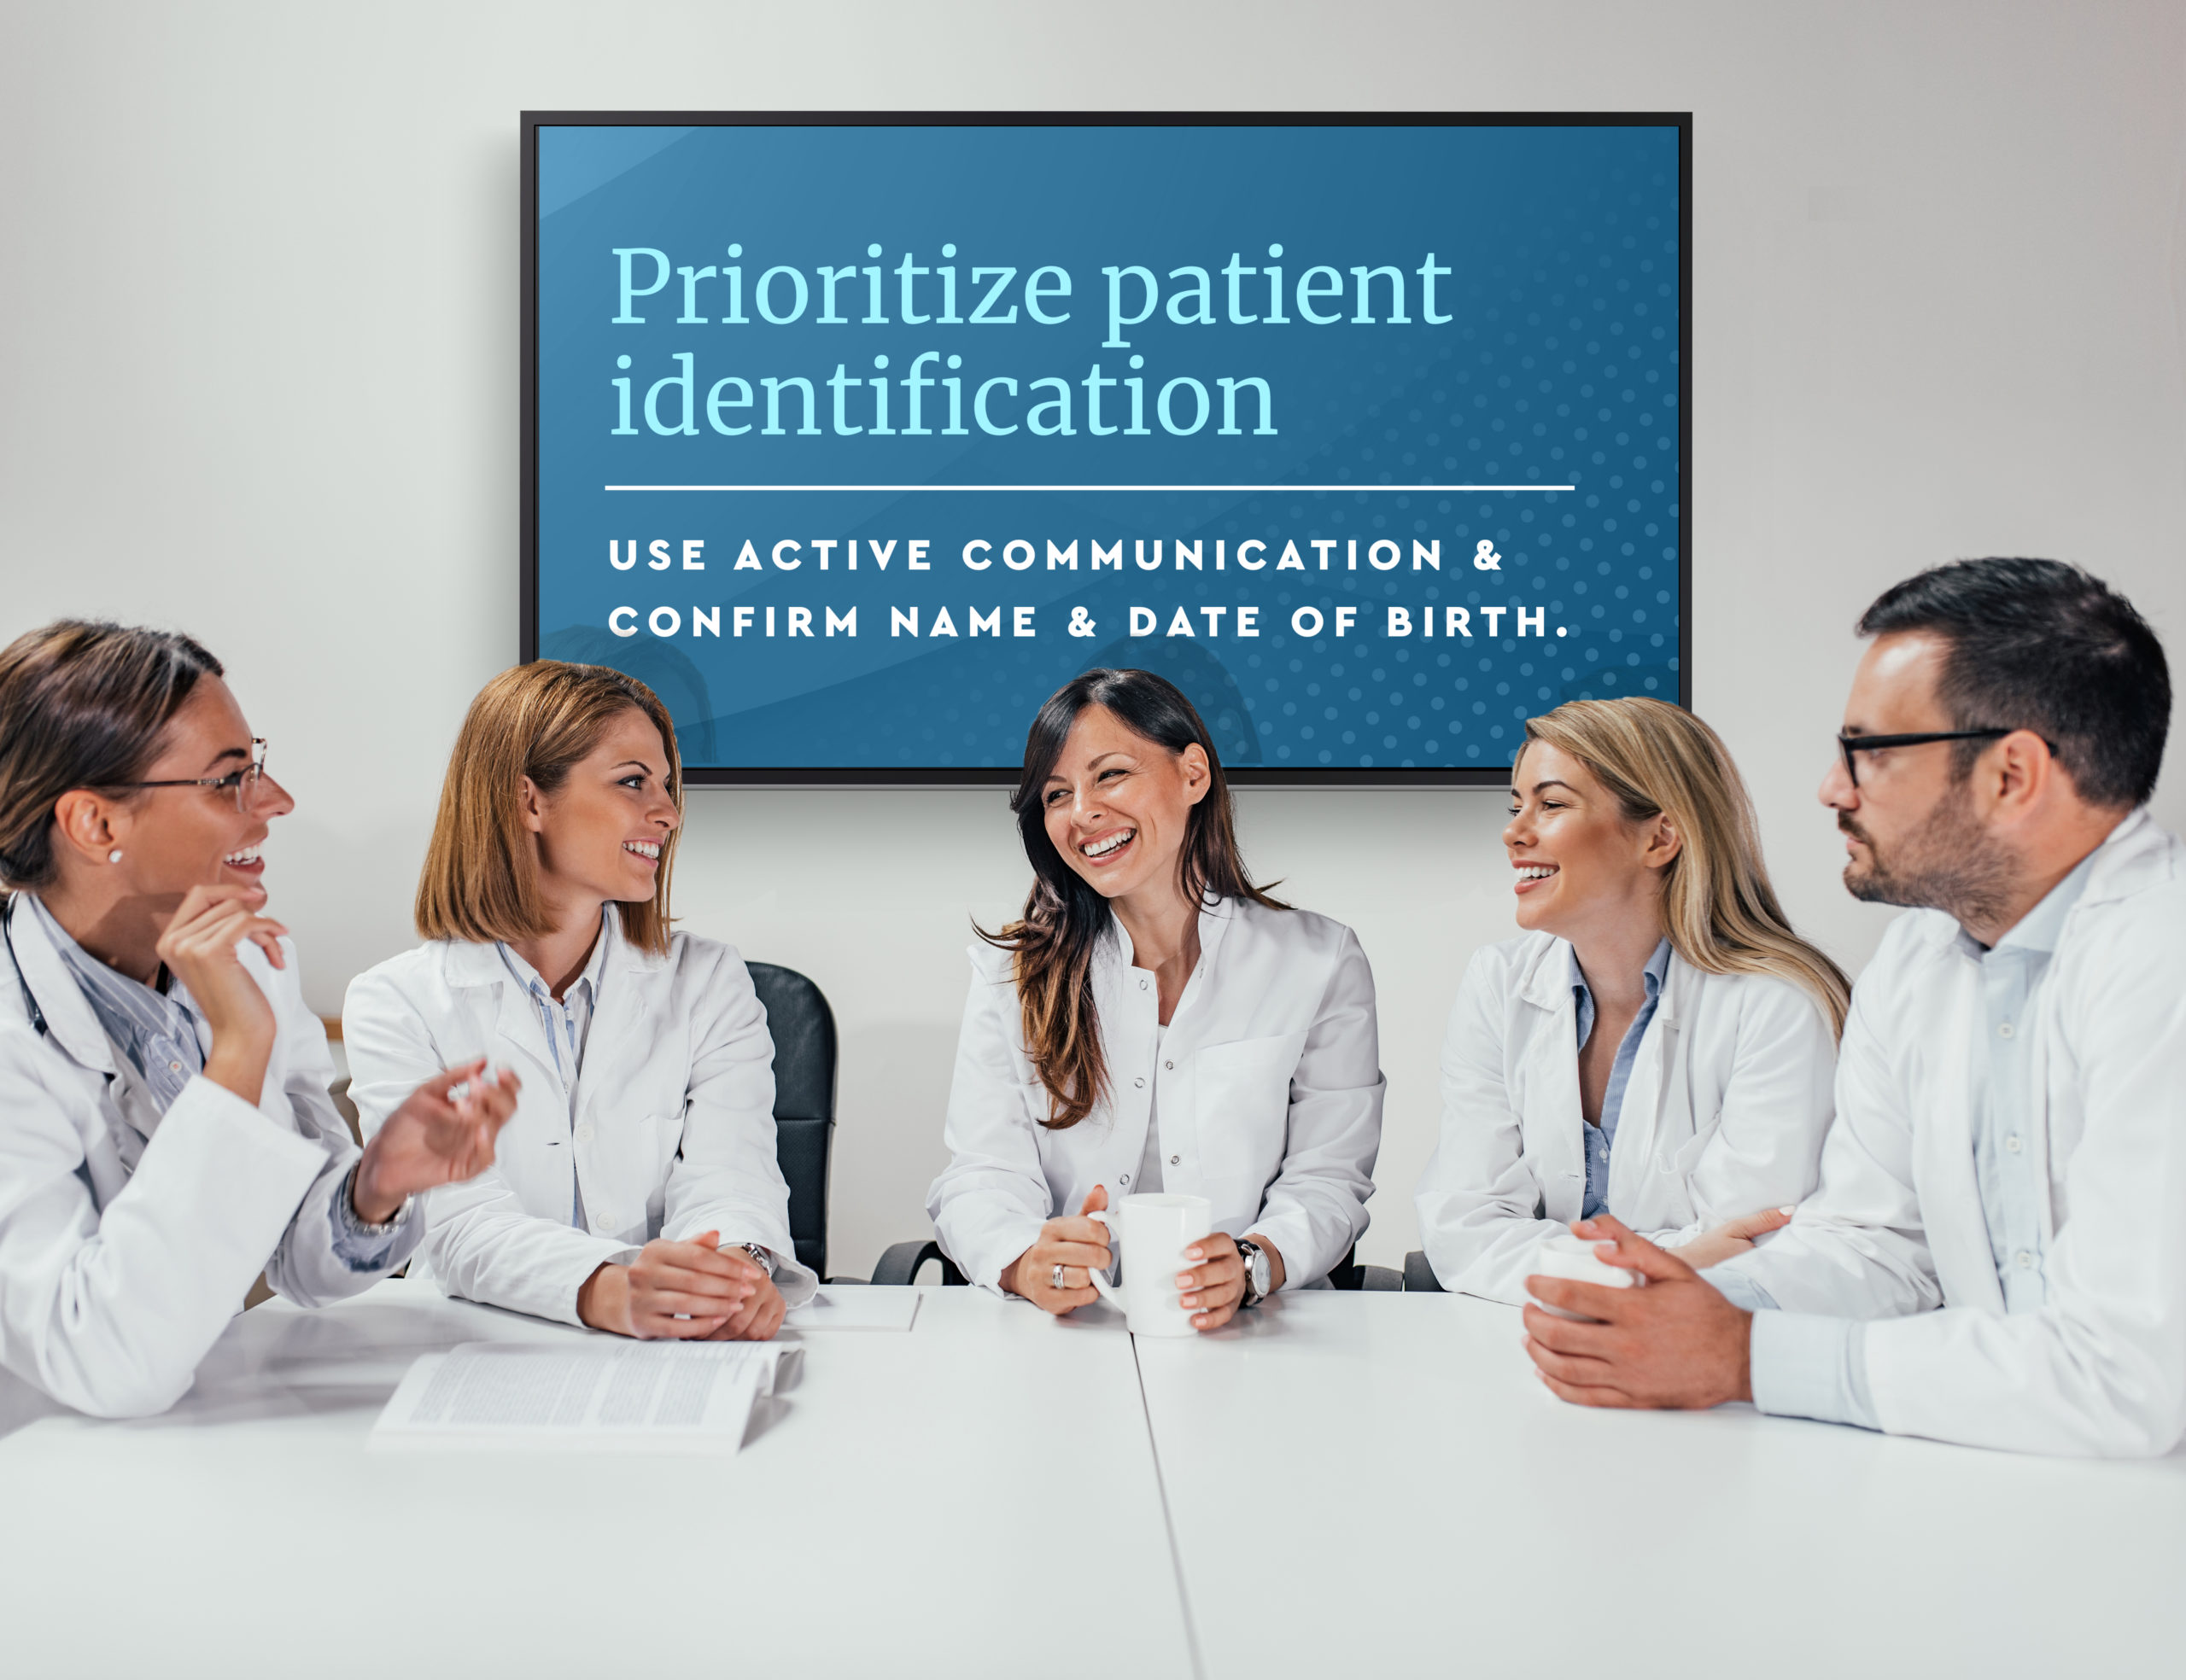 5 healthcare professionals sitting at a white table with a healthcare digital menu board behind them